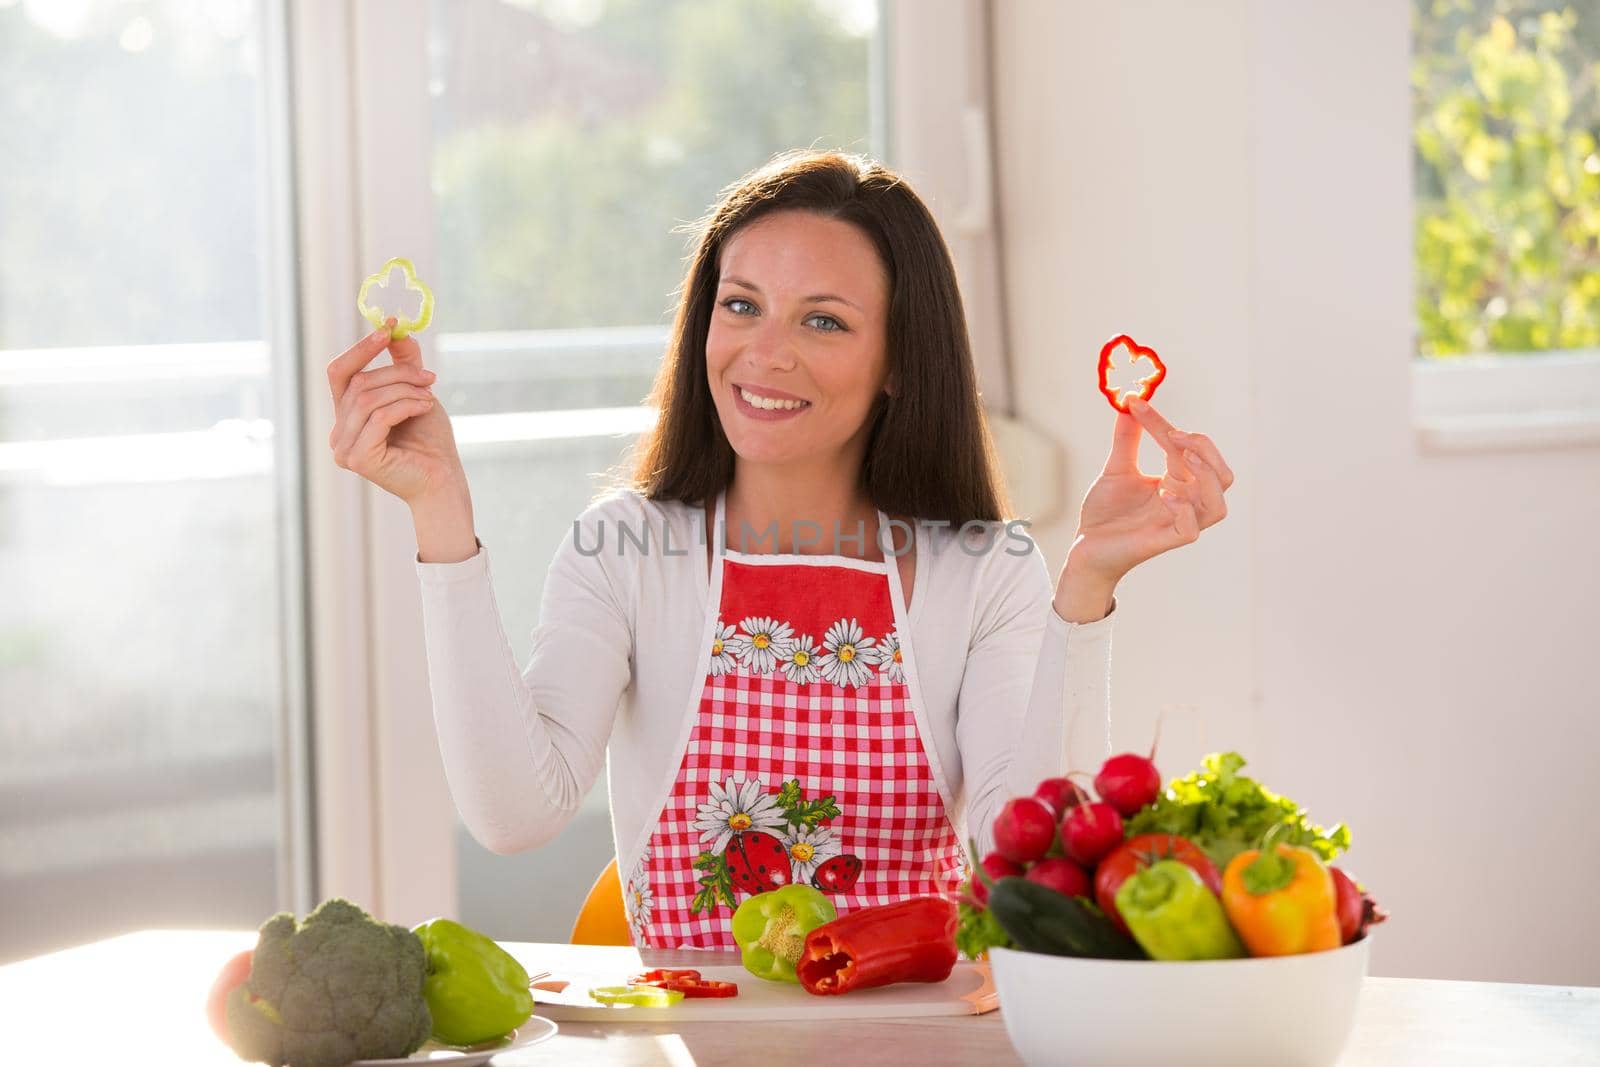 Happy young woman sitting at table with vegetables in bowl and holding pepper slices in hands